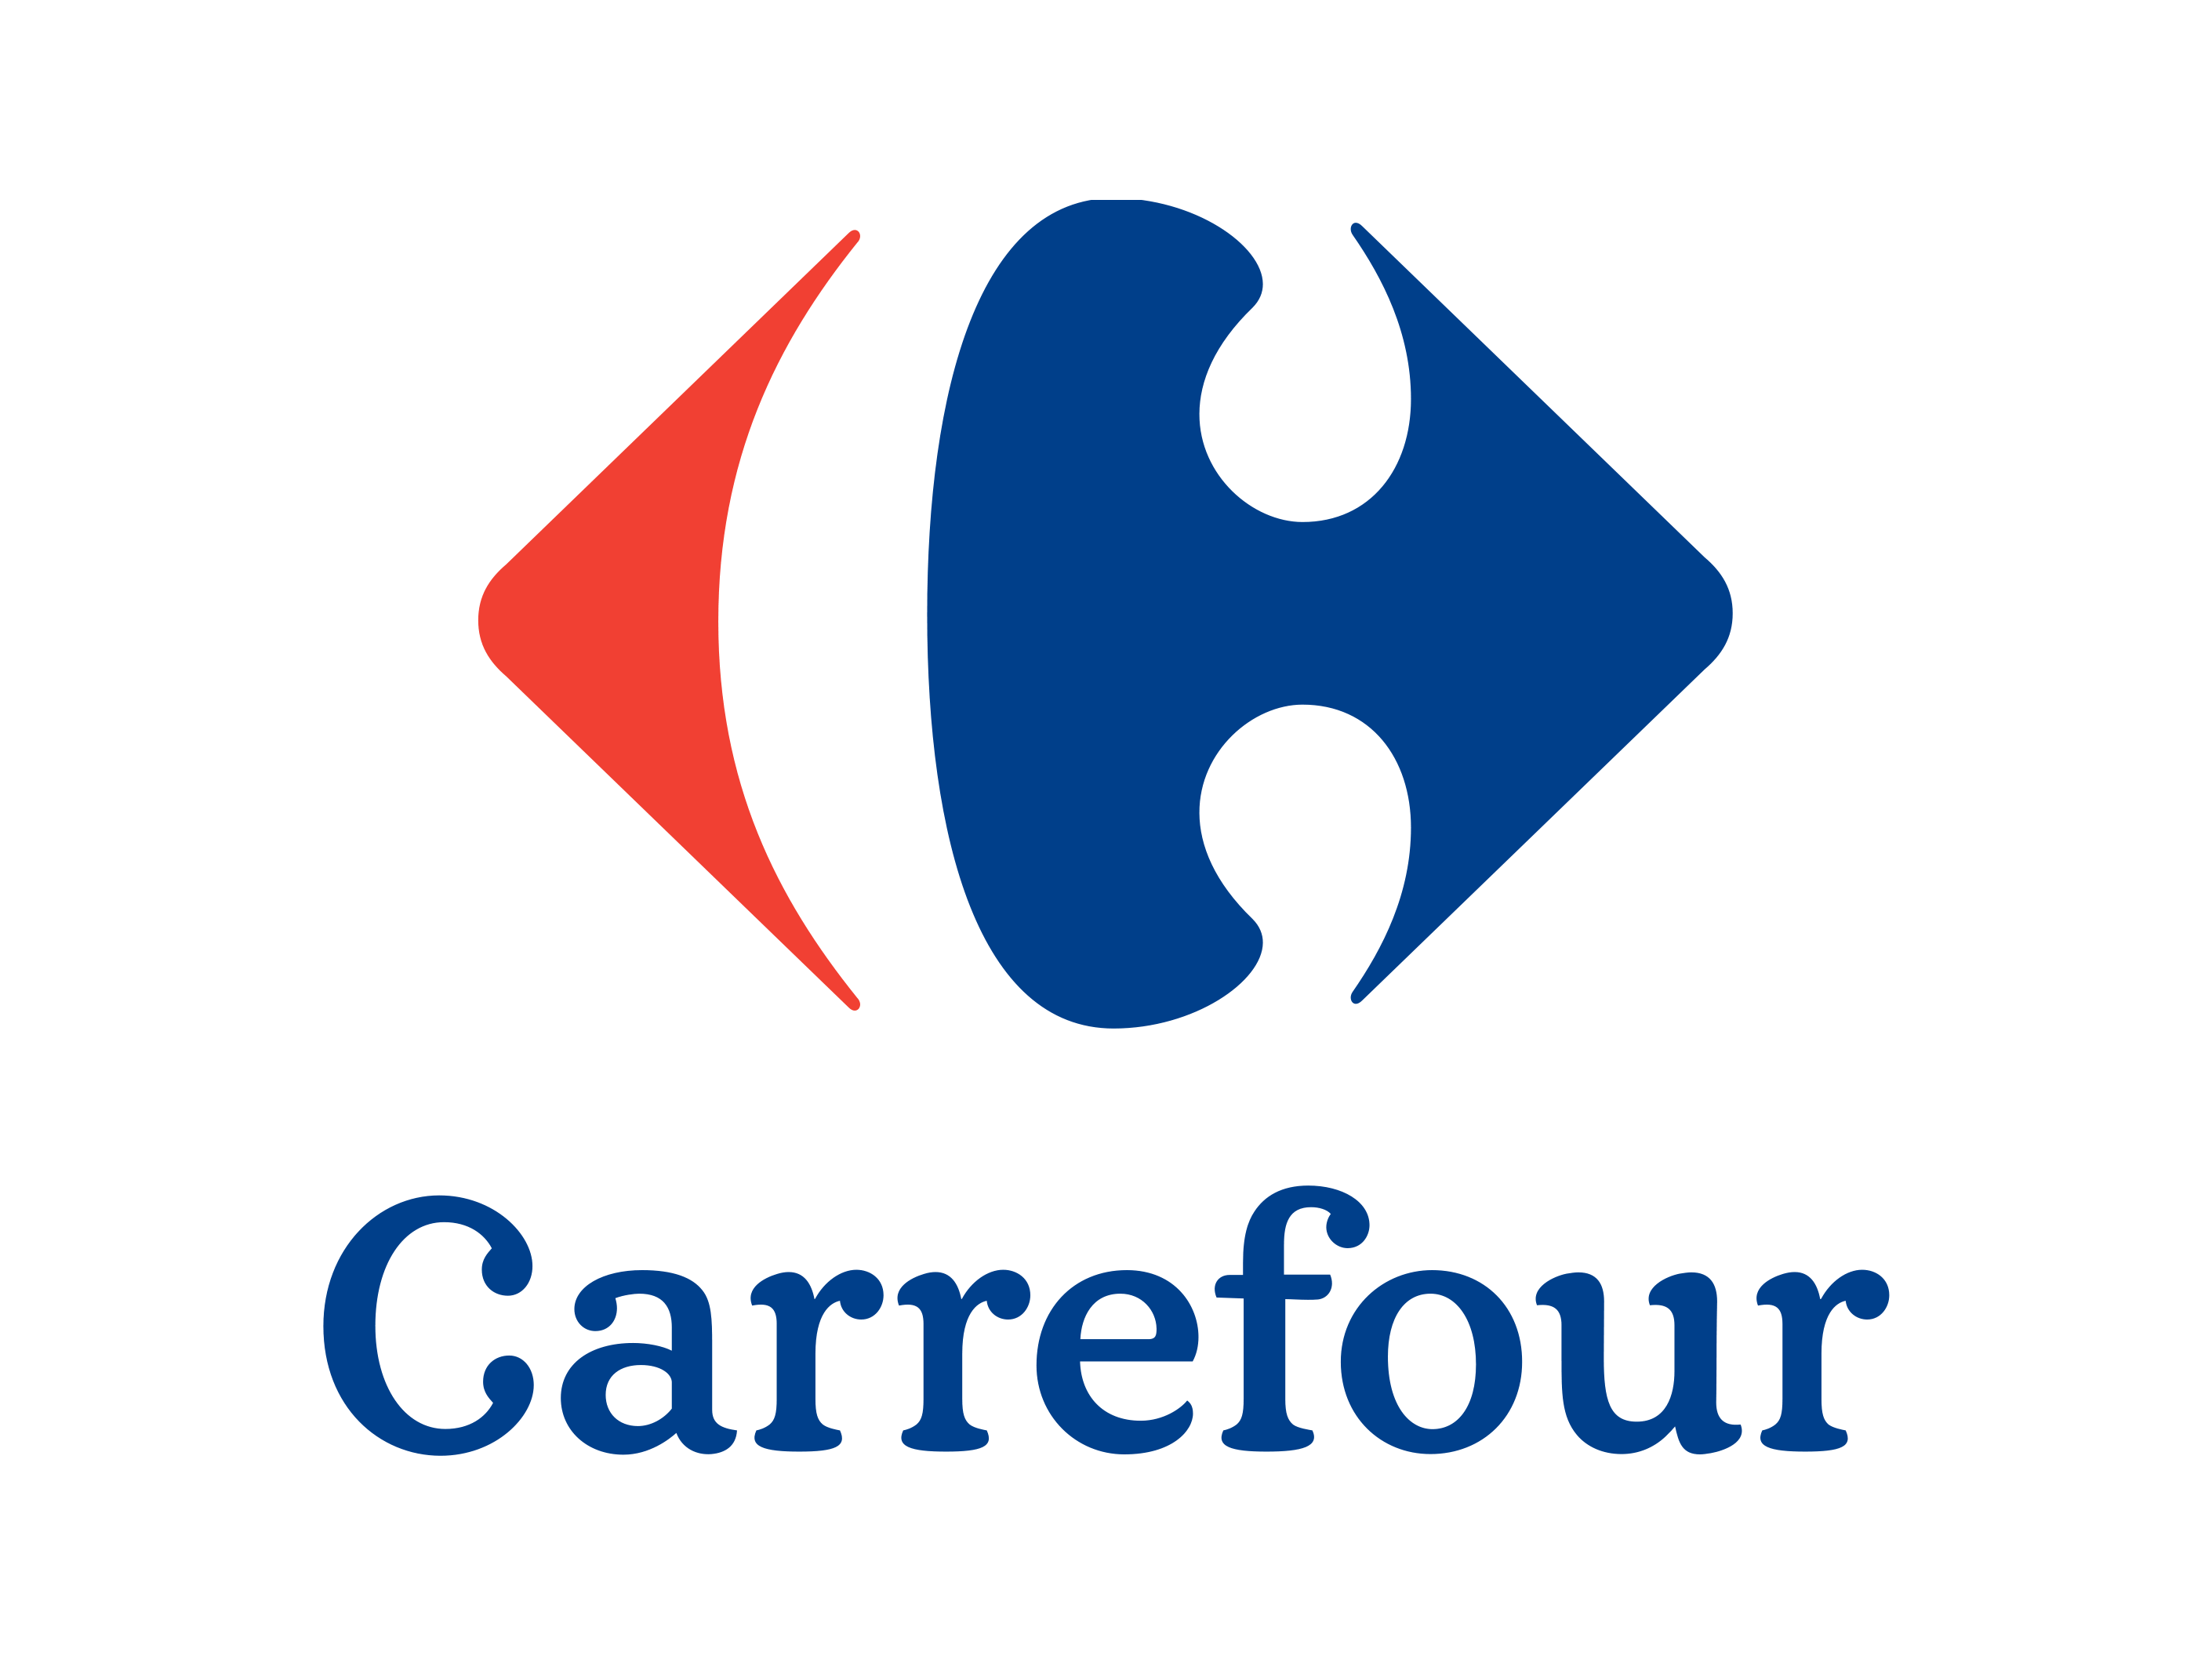 Carrefour logo, a client of why innovation!